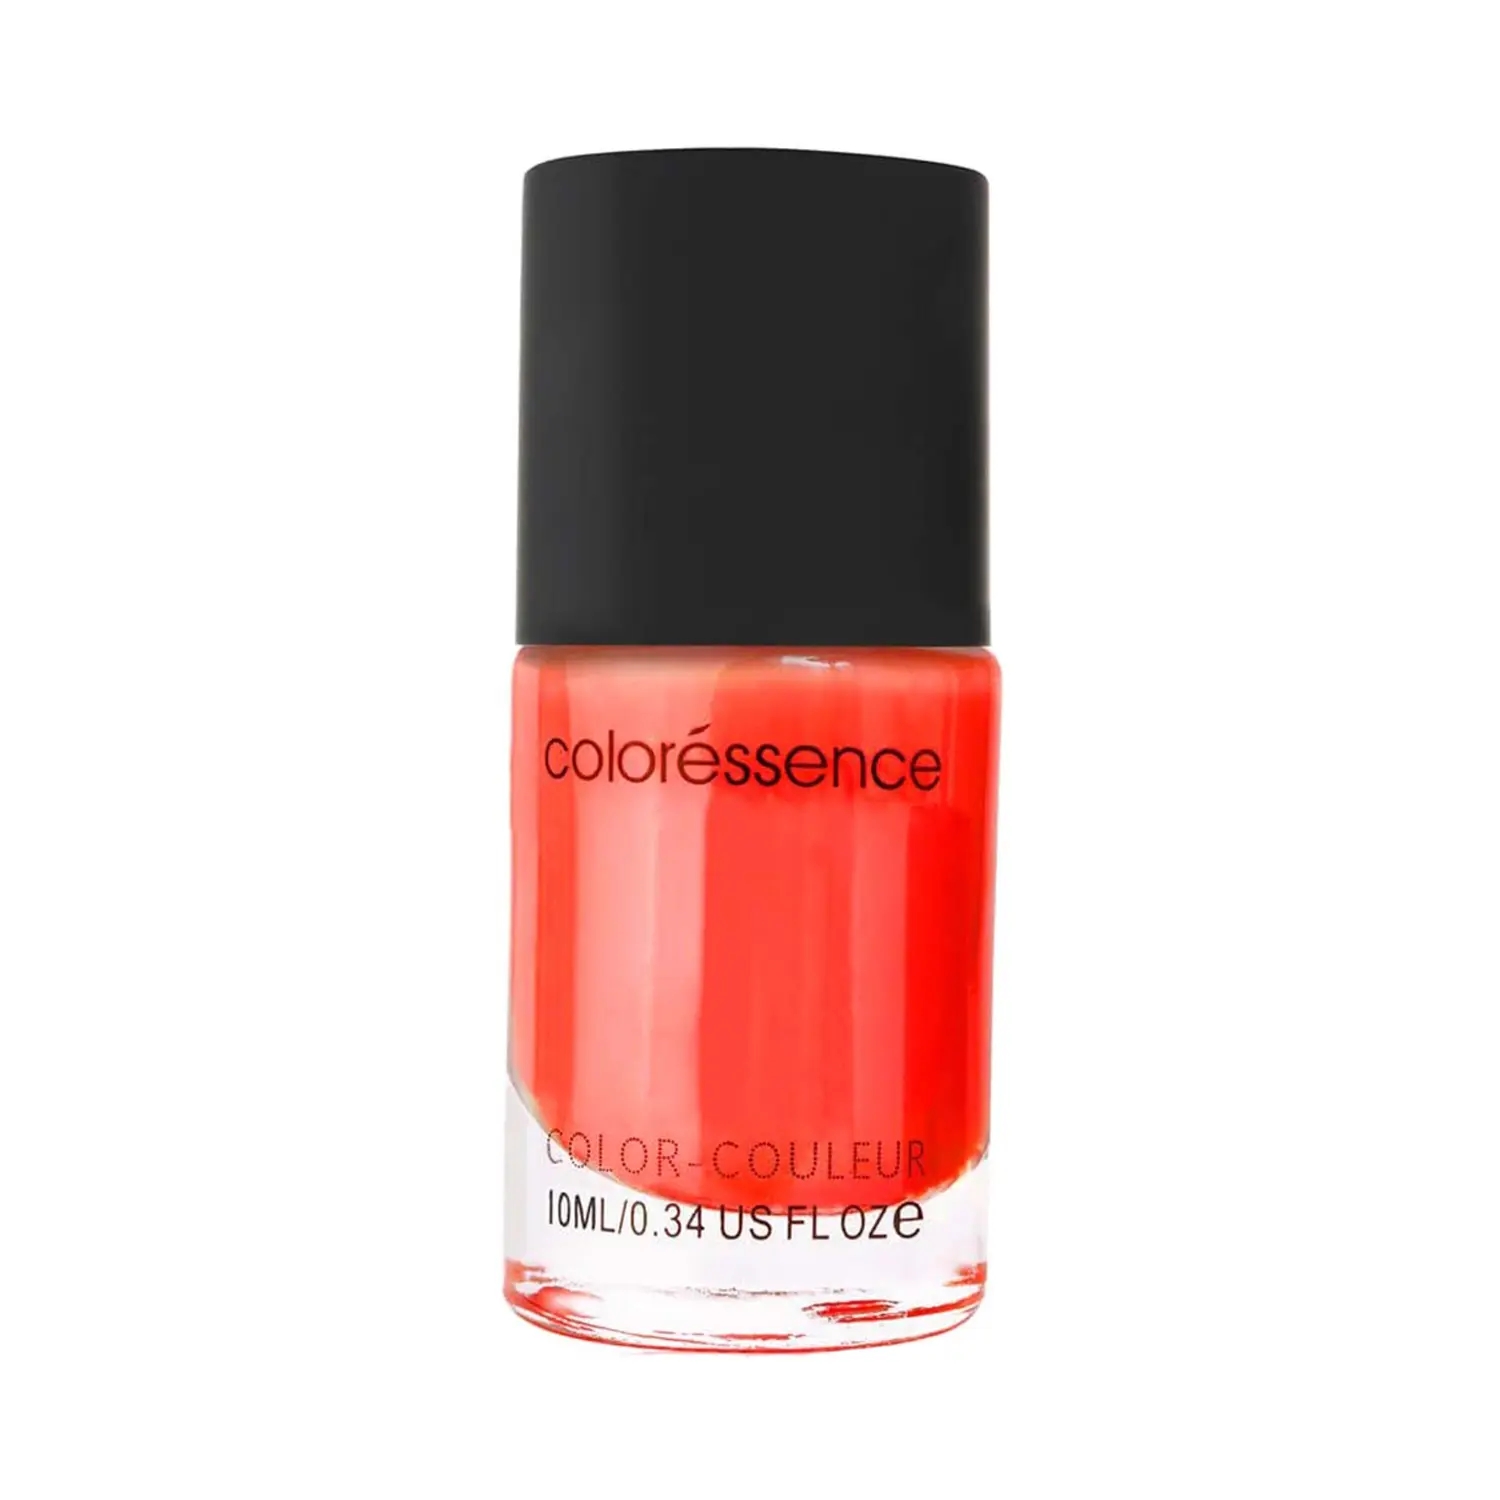 Coloressence Regular Nail Paint (Prime Rose) Price - Buy Online at Best  Price in India